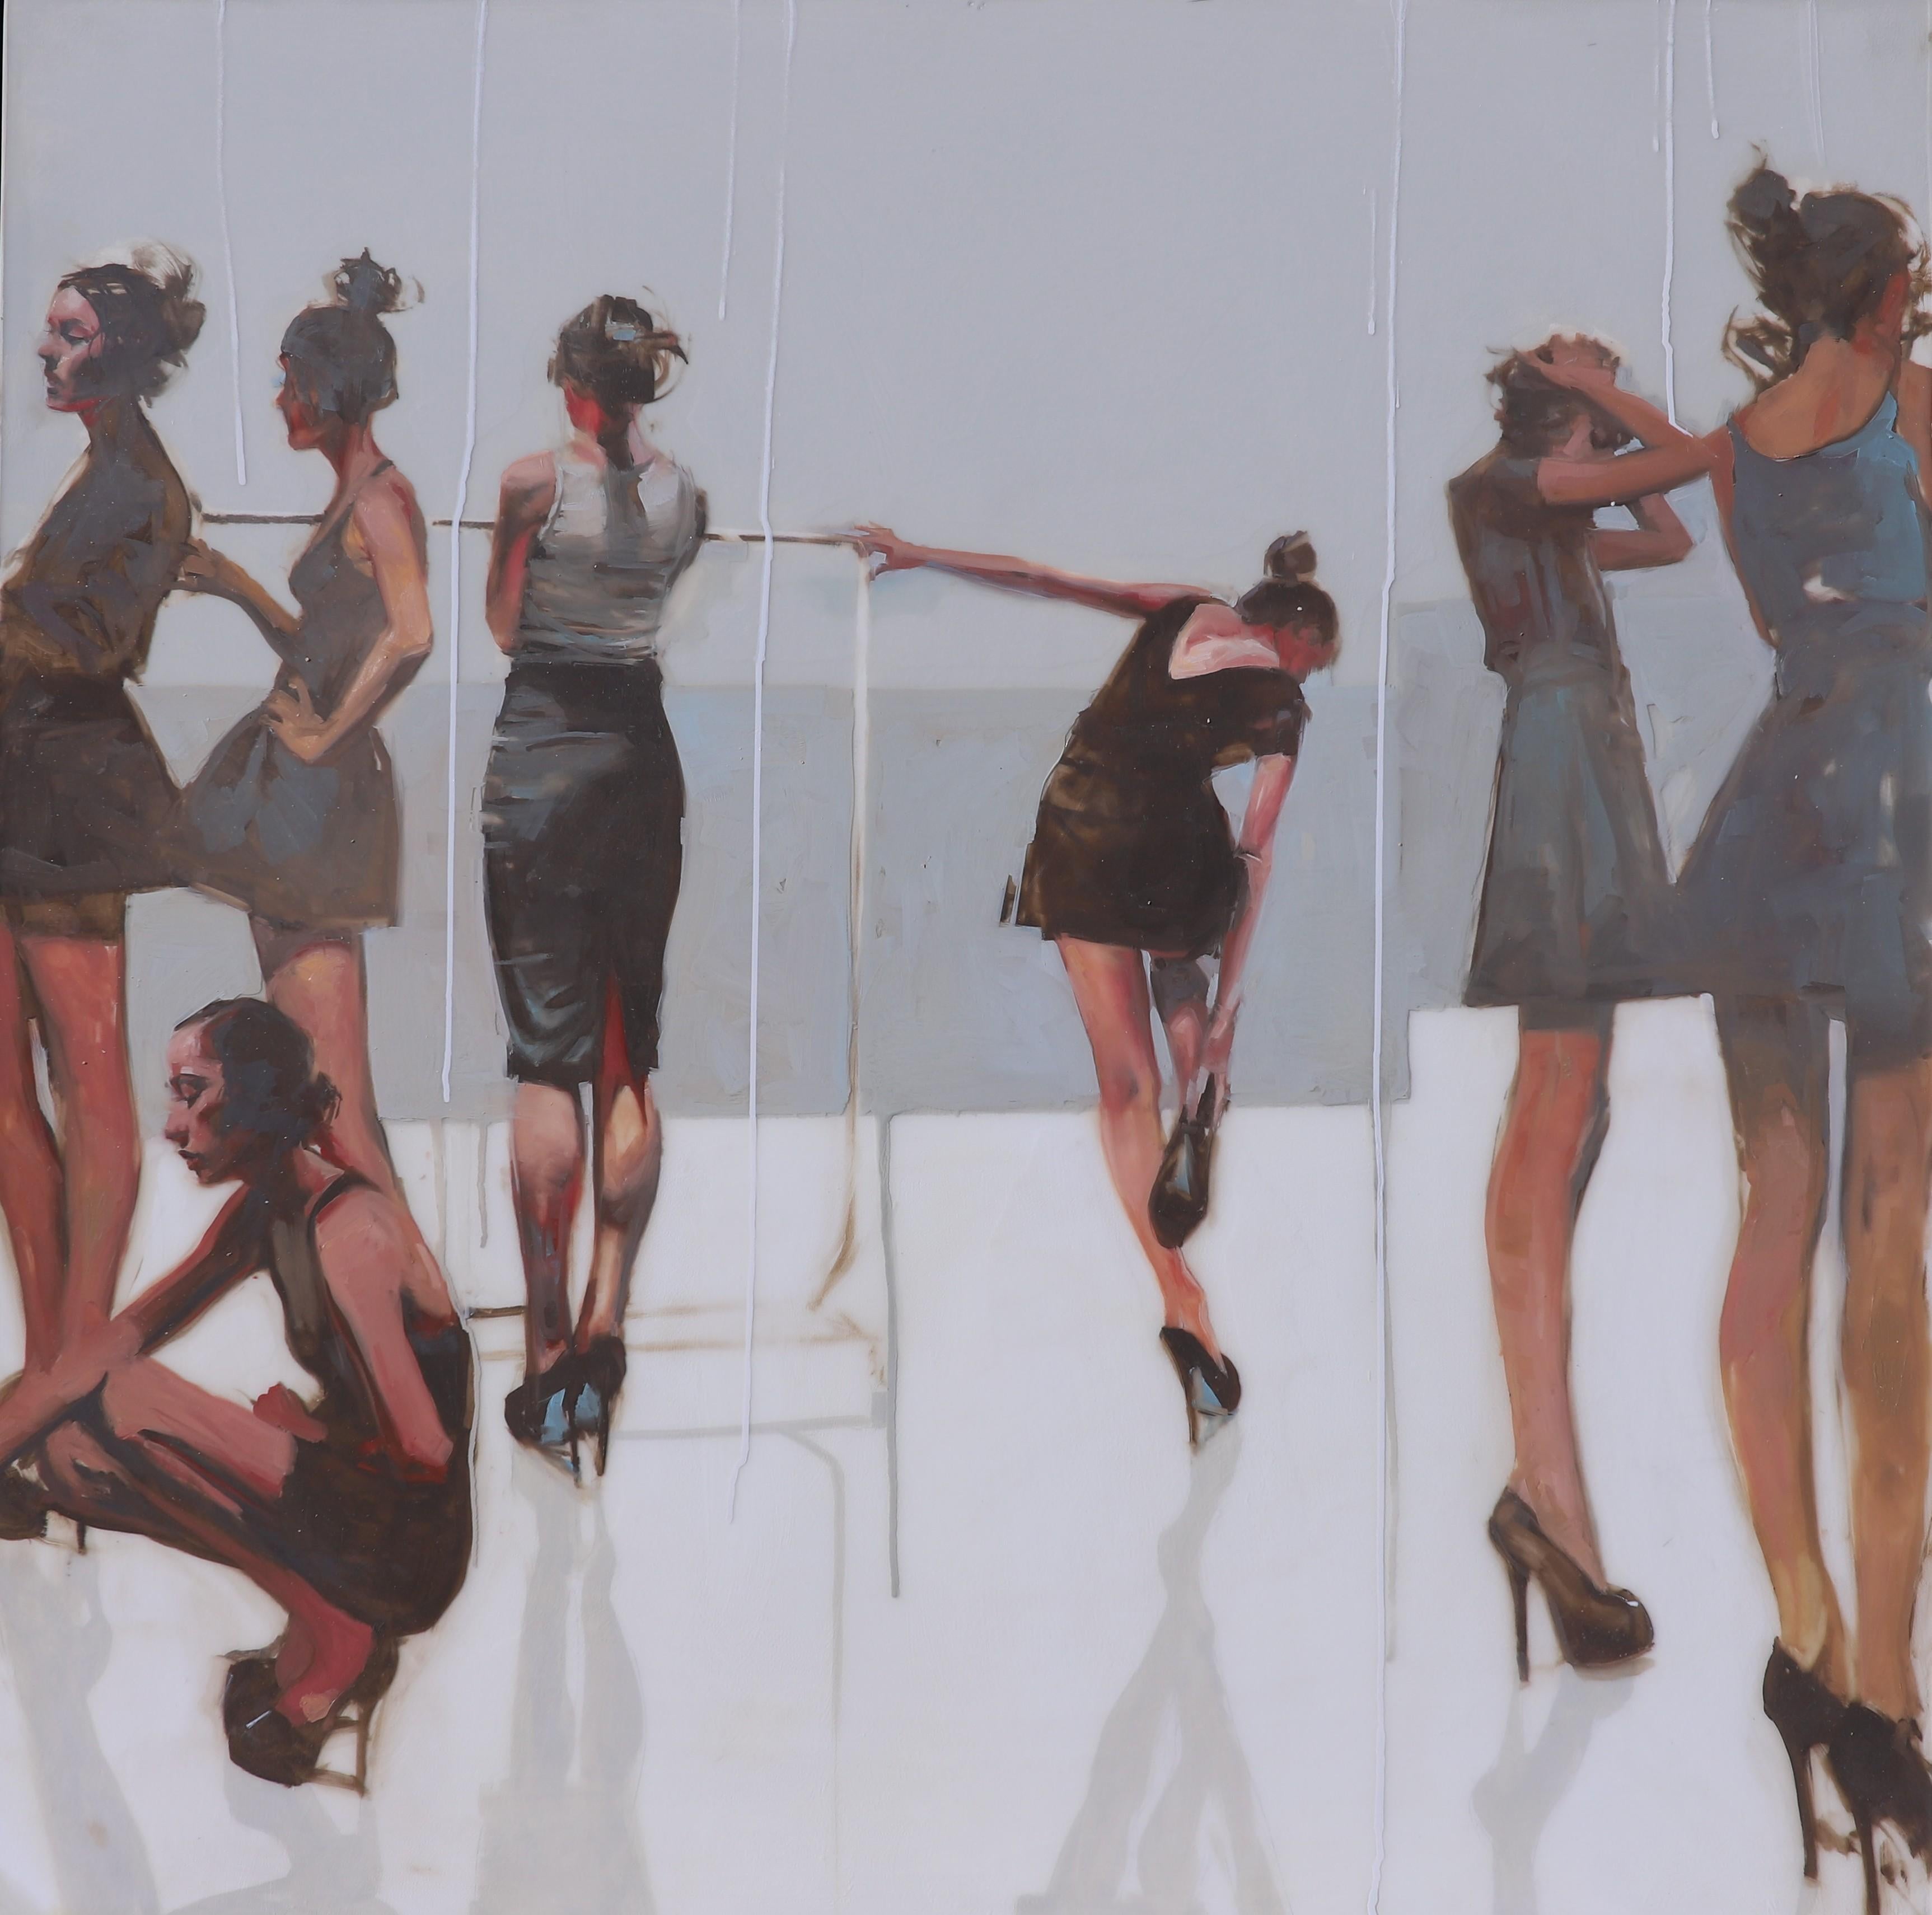 Michael Carson Figurative Painting - "When No One's Looking"